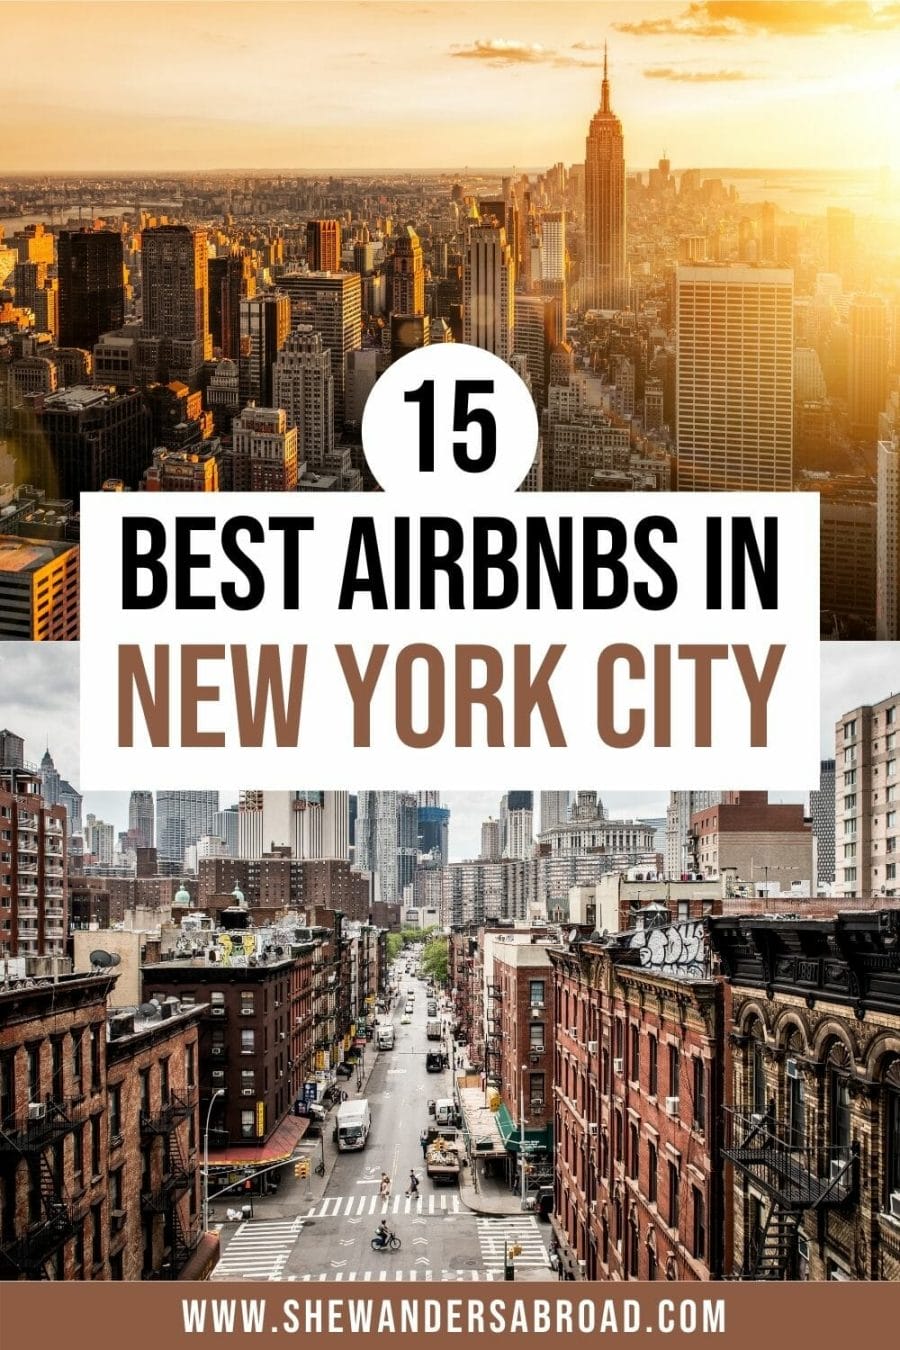 Best Airbnbs in New York City